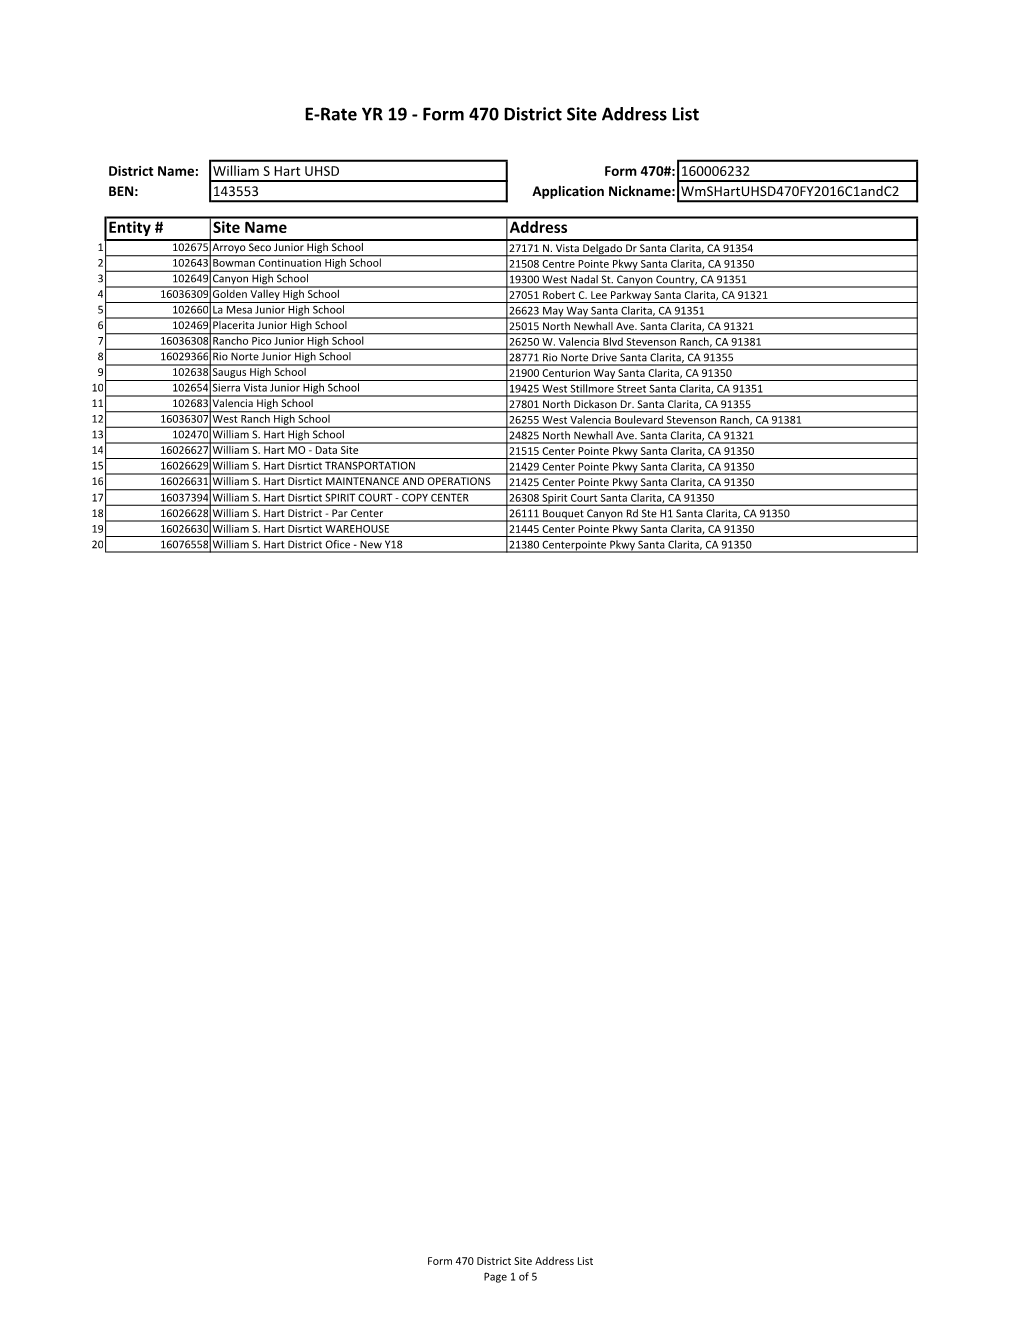 Additional Information Sheet, District Site Address List and E-Rate